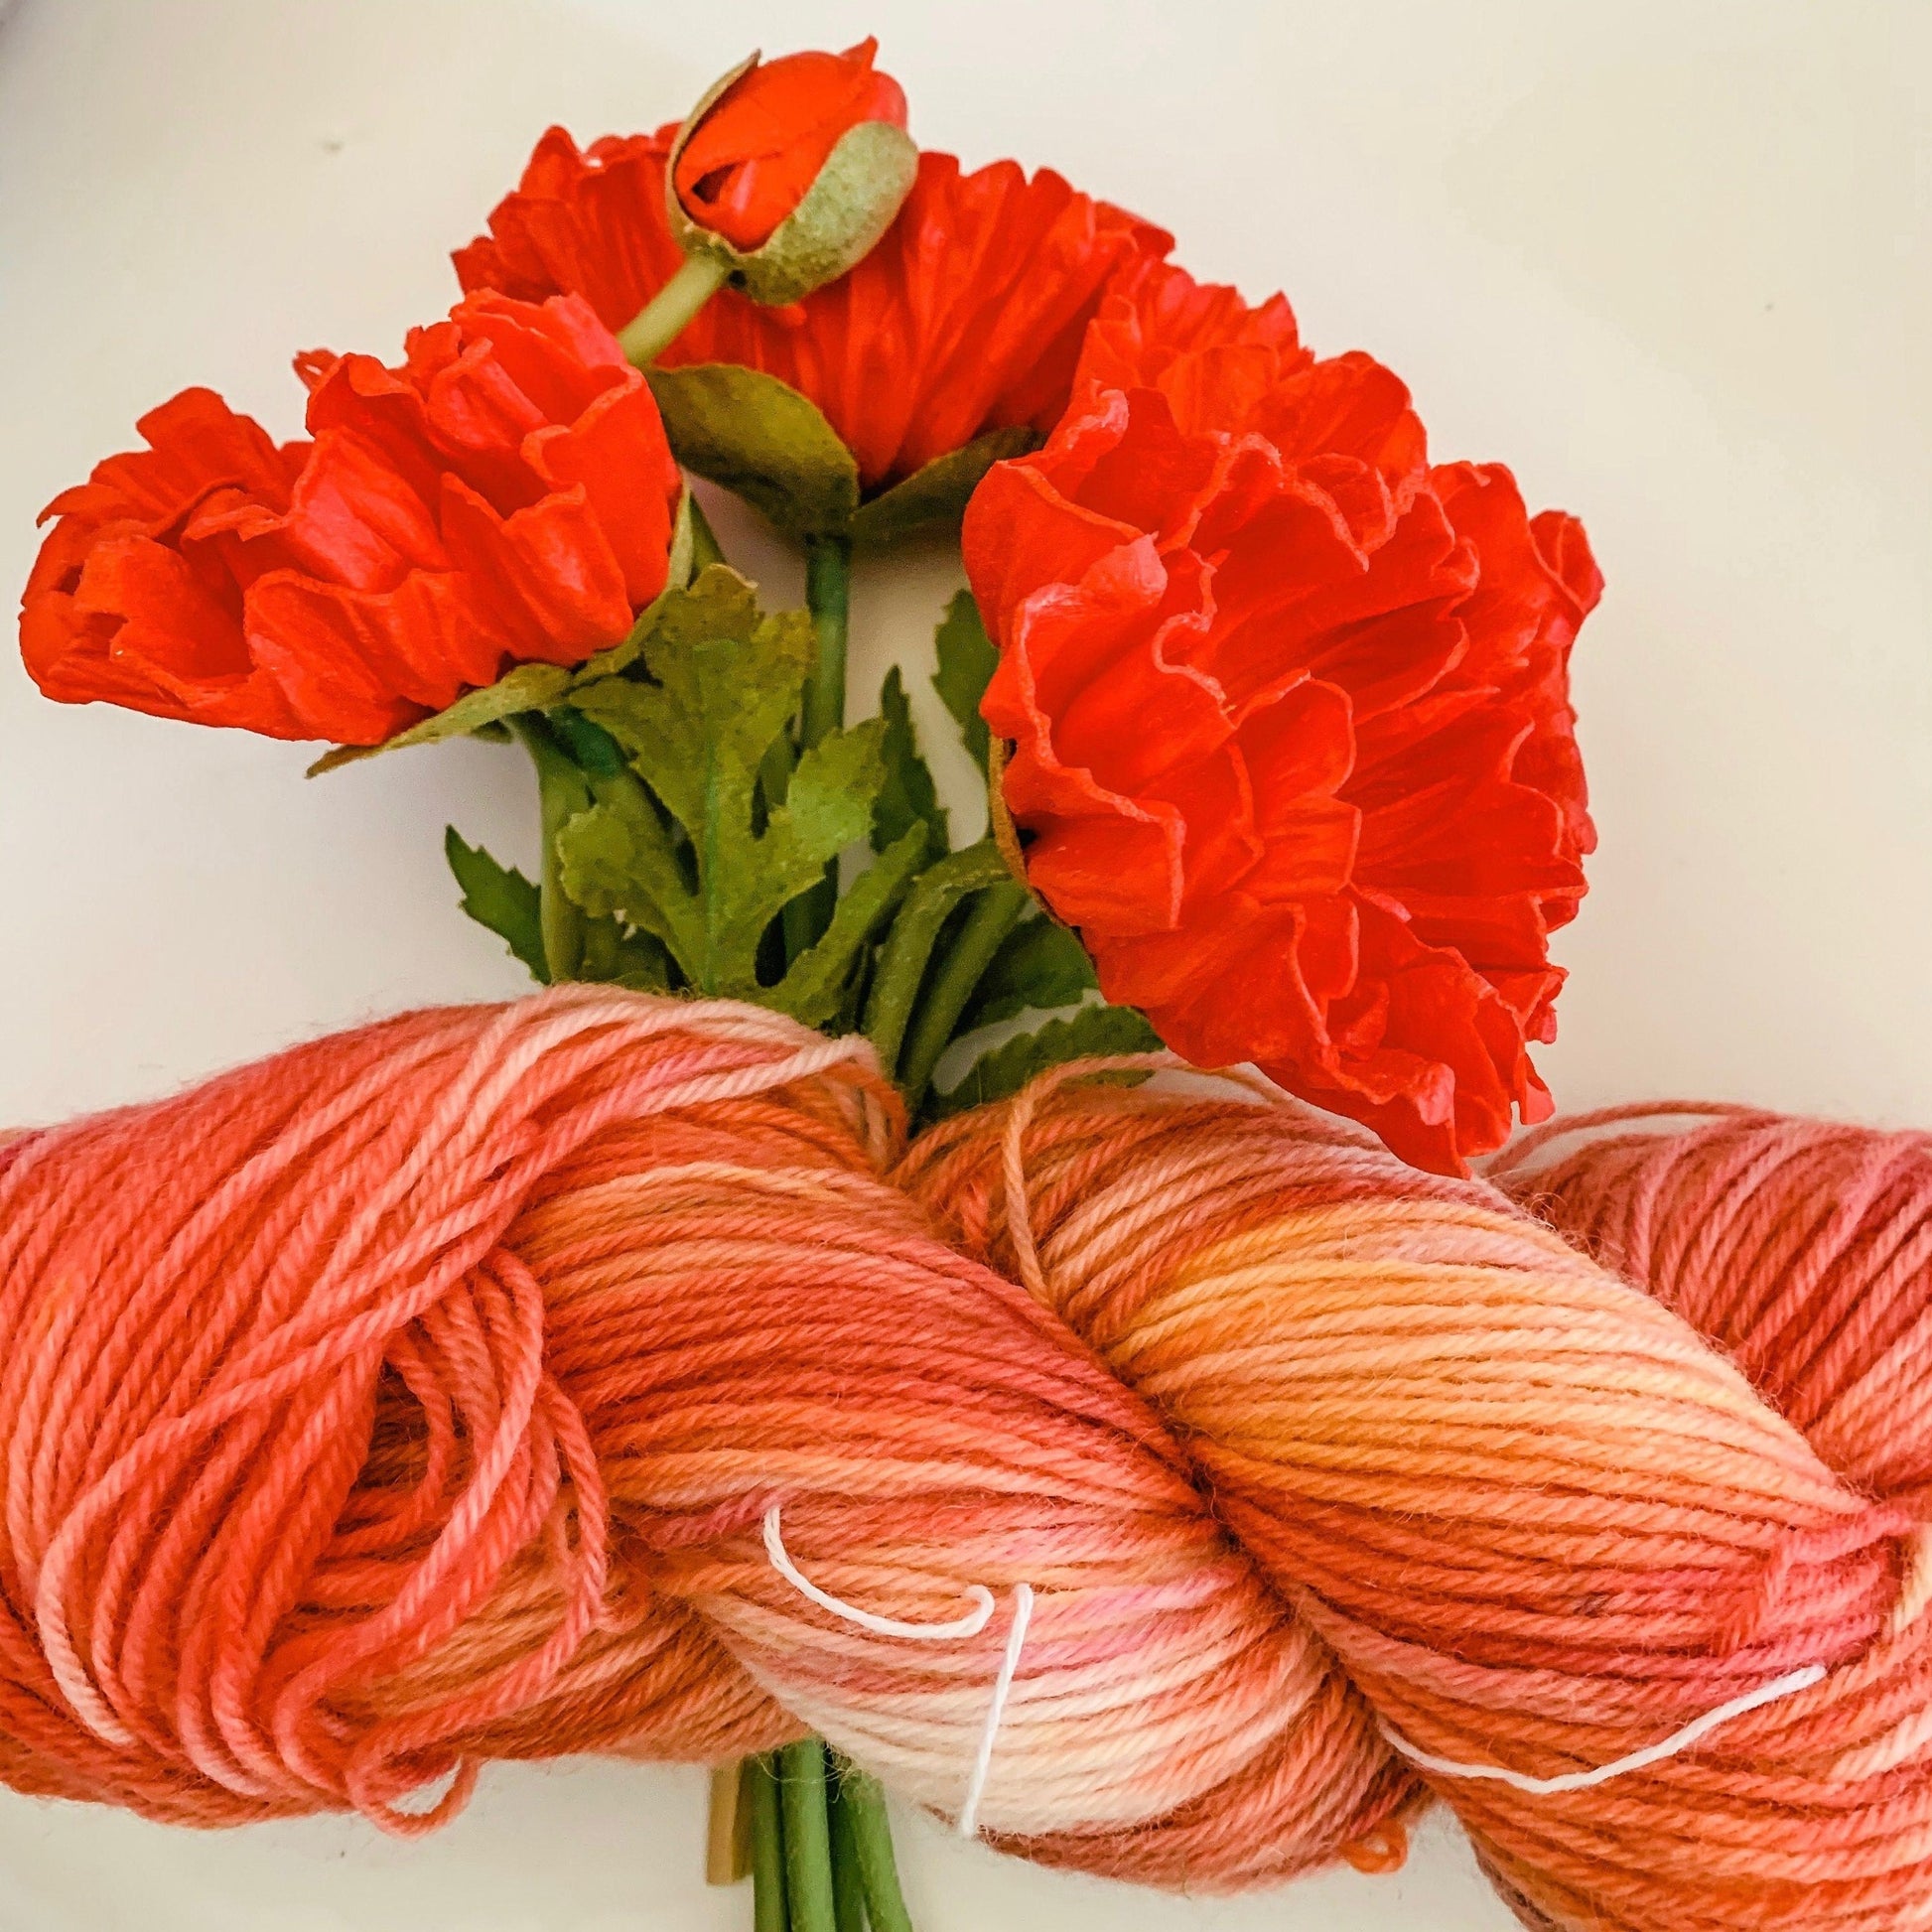 A close-up view of the Poppy colorway on a faux poppy flower.